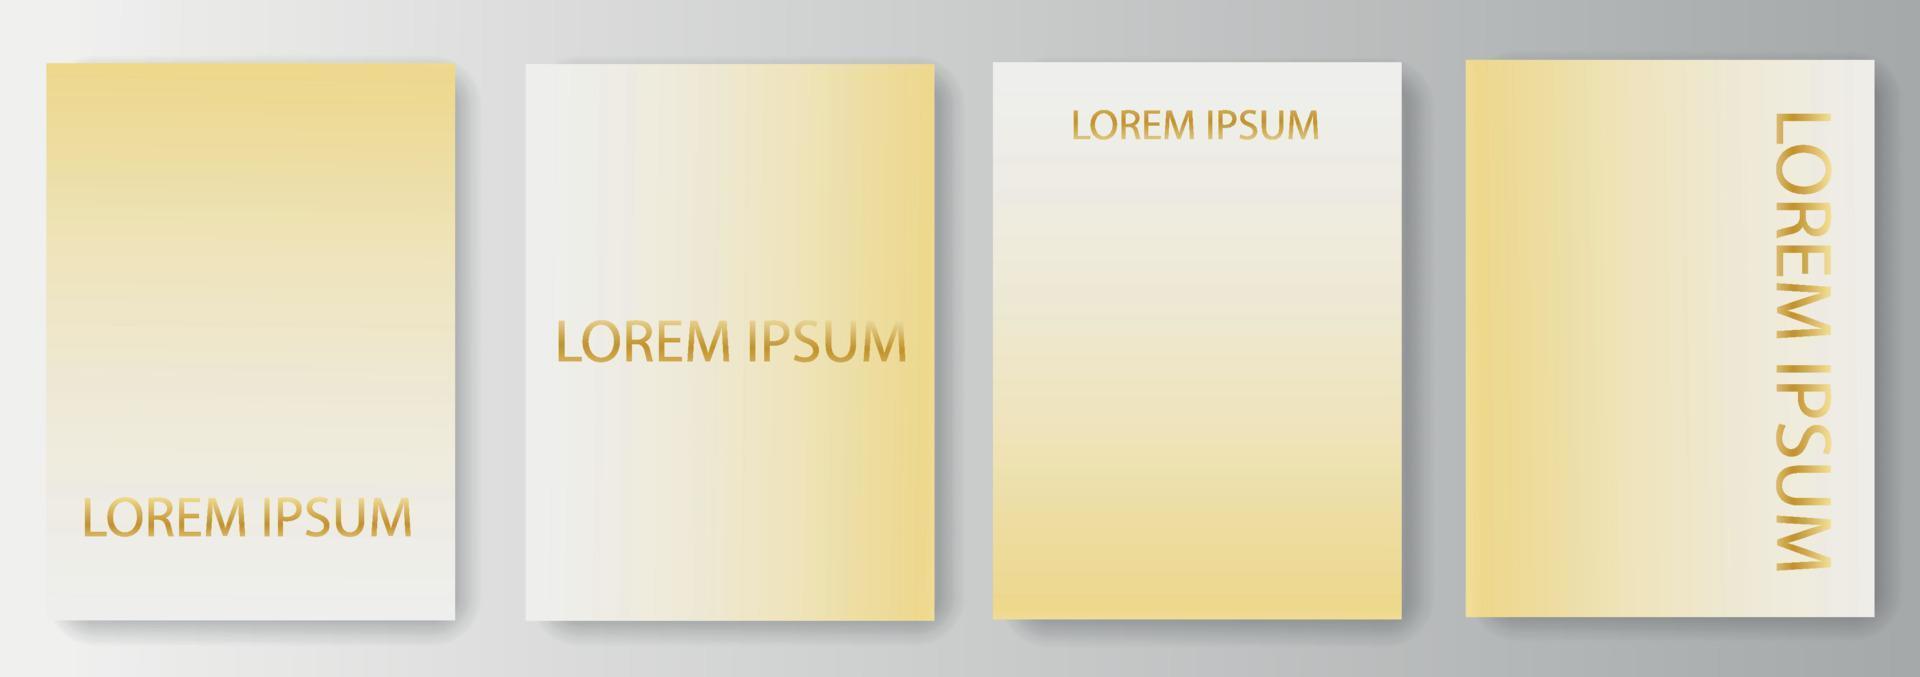 Set collection of gradient golden backgrounds with place for text vector